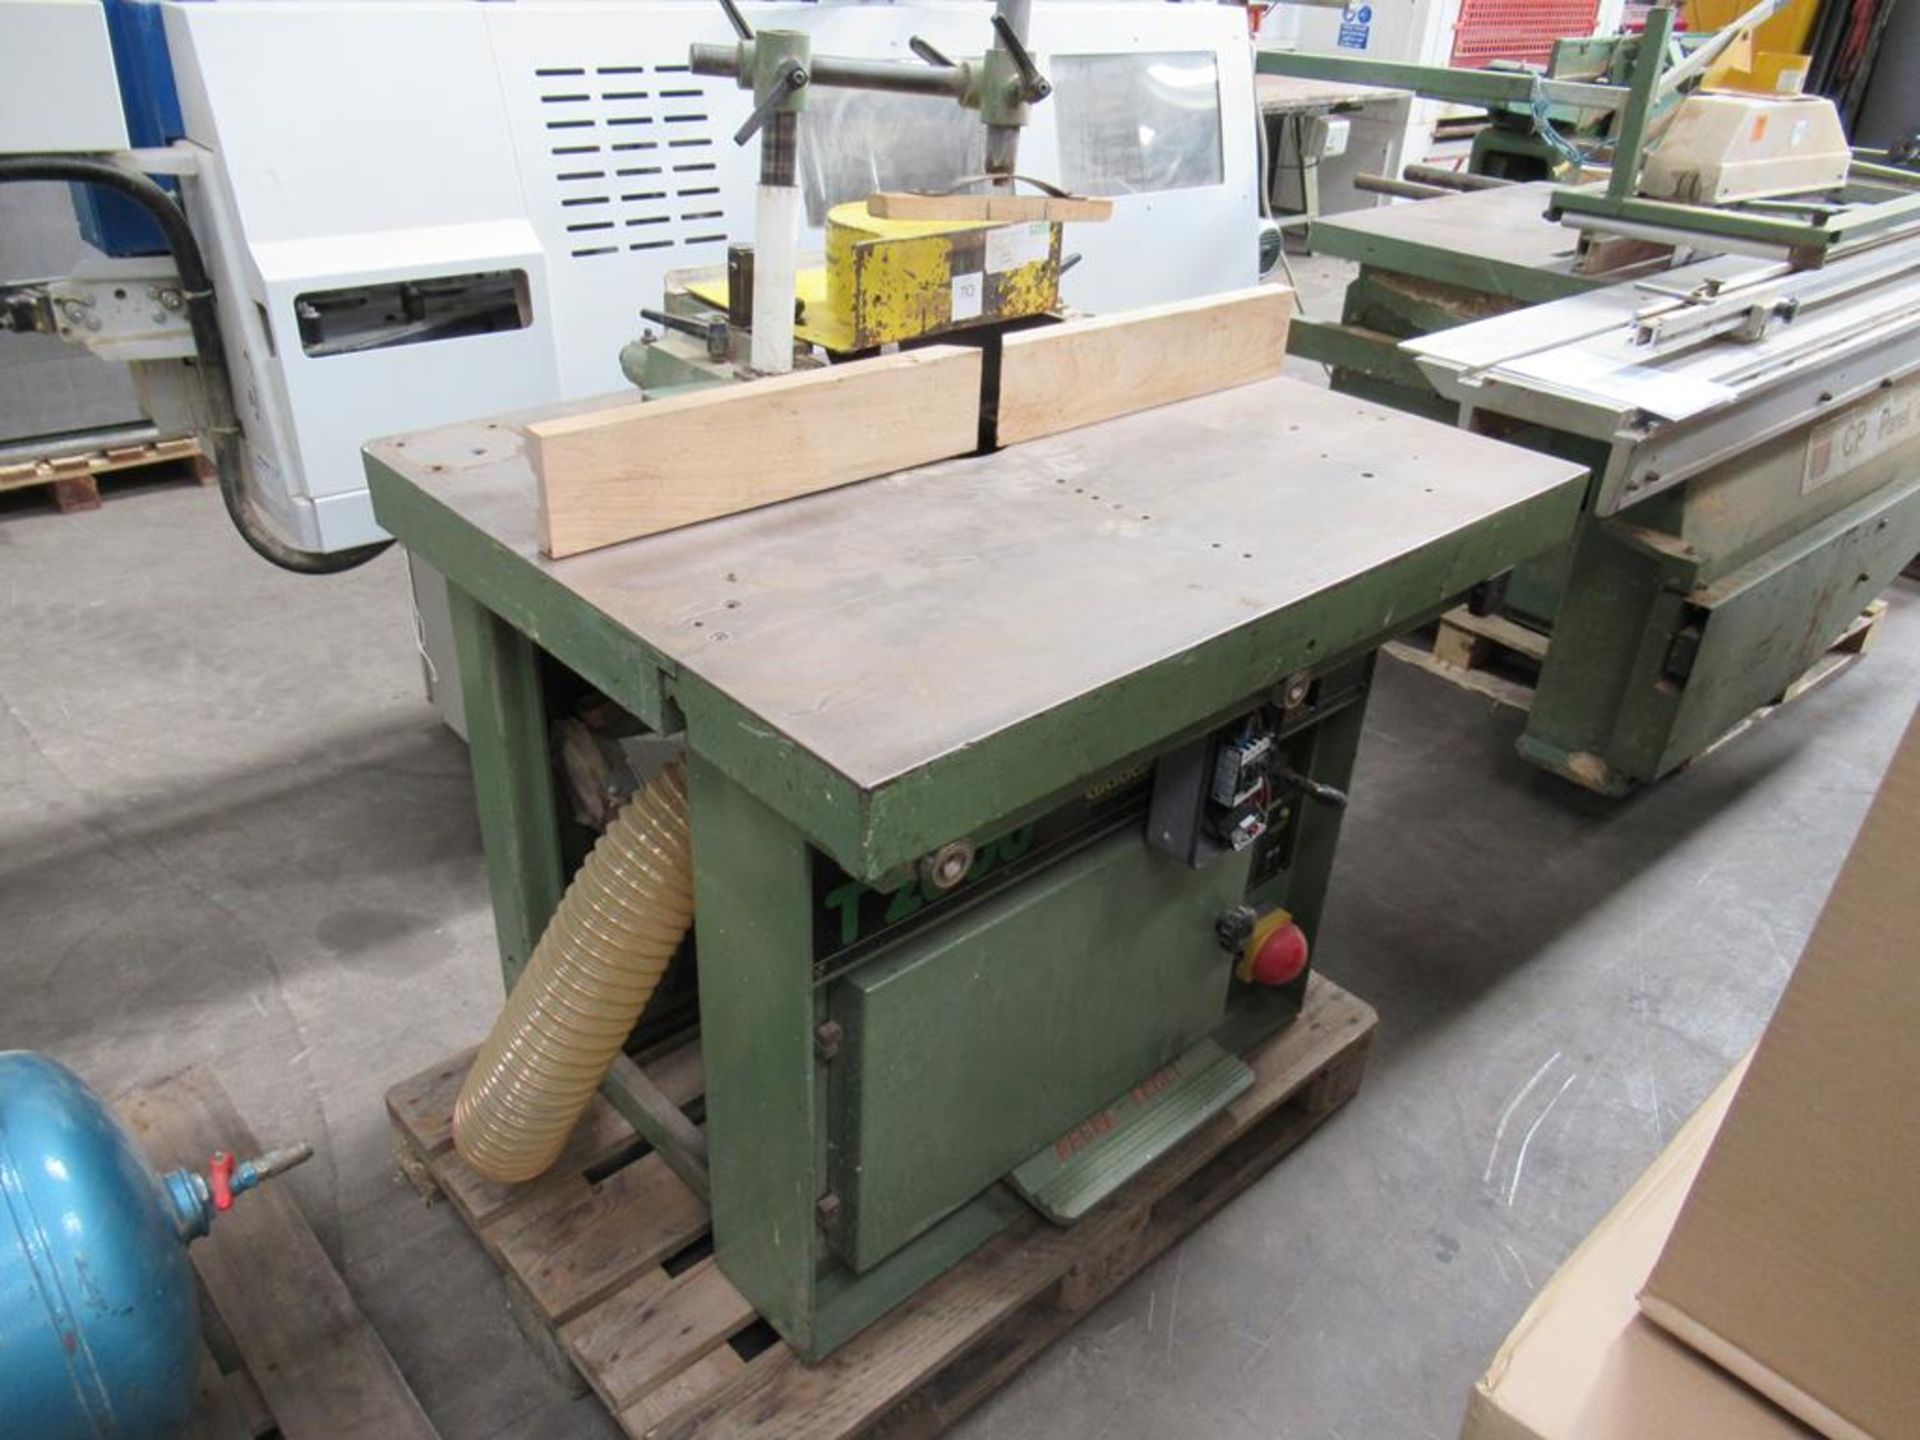 A Griggio T200 Heavy Duty spindle moulder, 415V, 3 phase, 50 Hz.